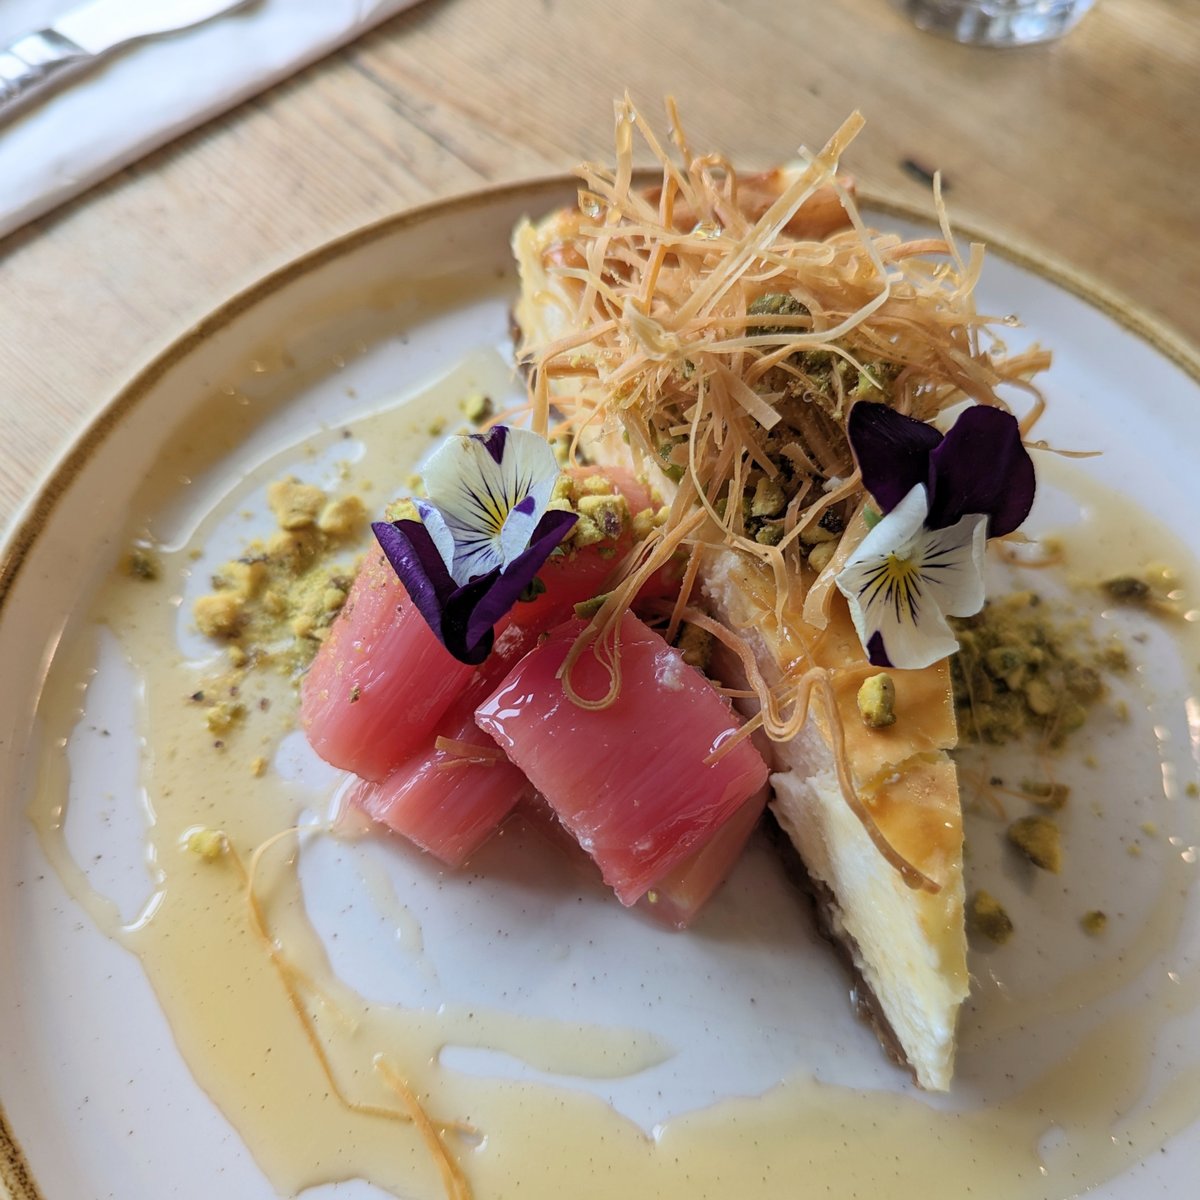 LABNEH CHEESECAKE 🌸 This is not just any cheese cake it's made using our signature labneh and paired with delicious rhubarb, pistachio's, crunchy filo ribbons and drizzled with local Herefordshire honey. Trust us - it's yummy! Have you tried it?